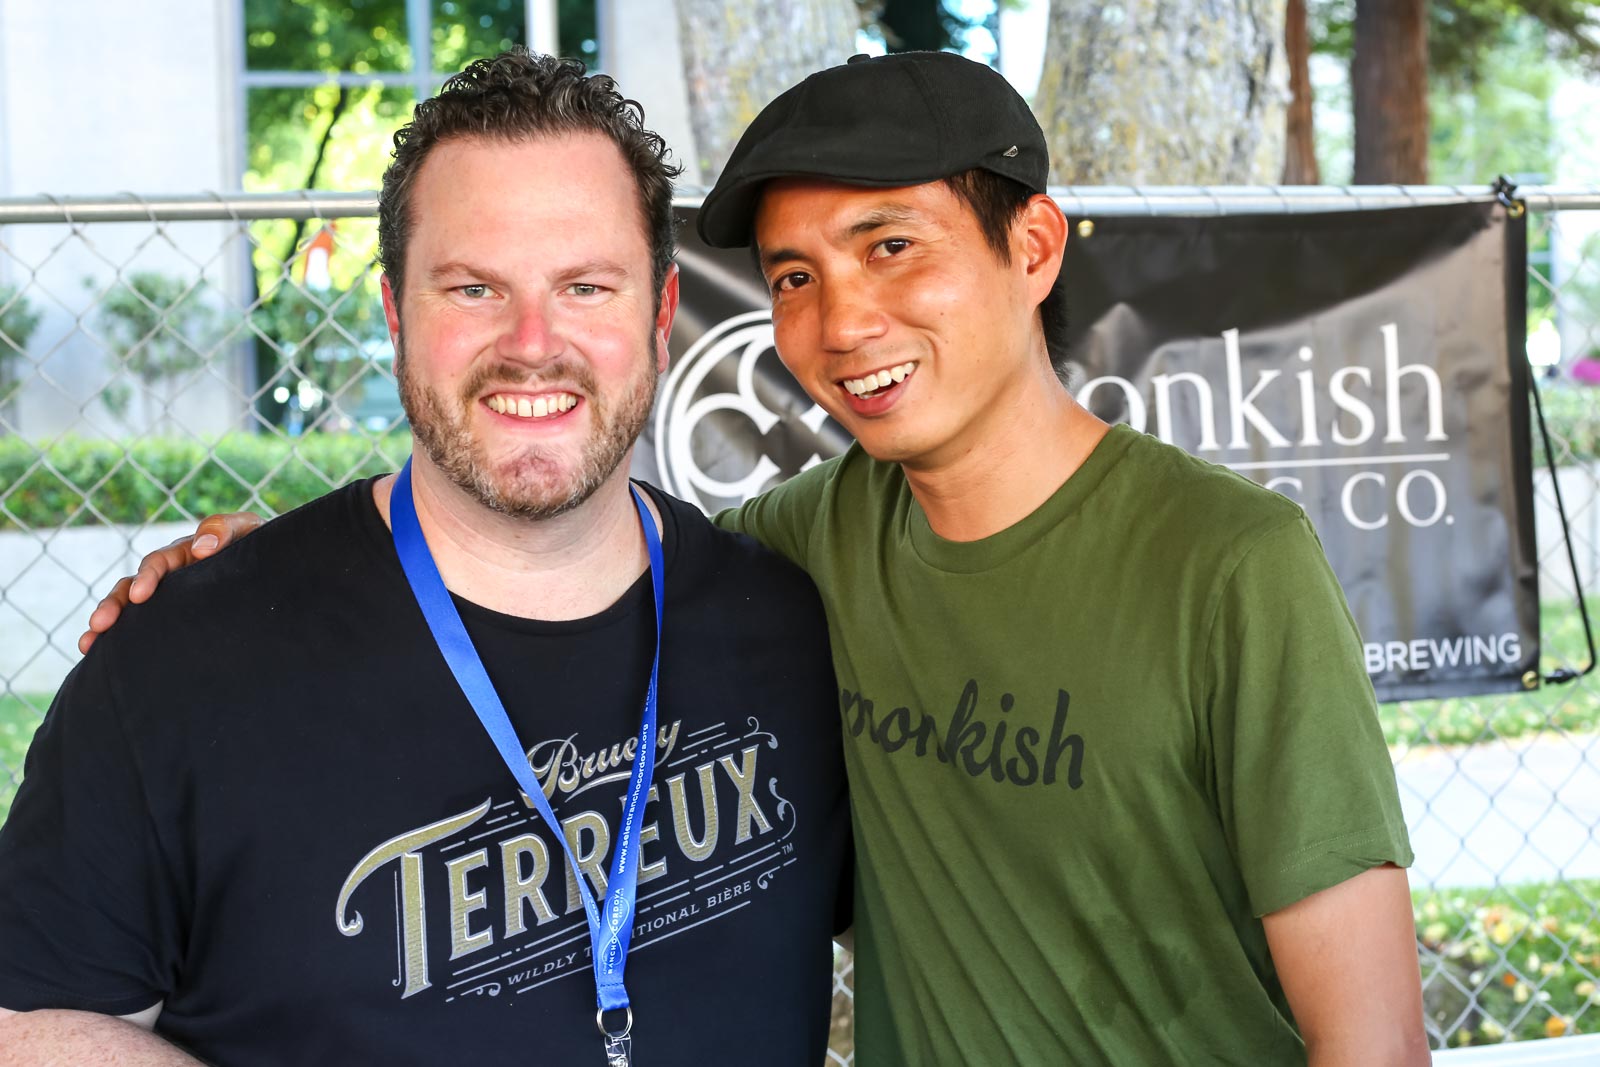 Patrick Rue of The Bruery and Henry Nguyen of Monkish Brewing Company